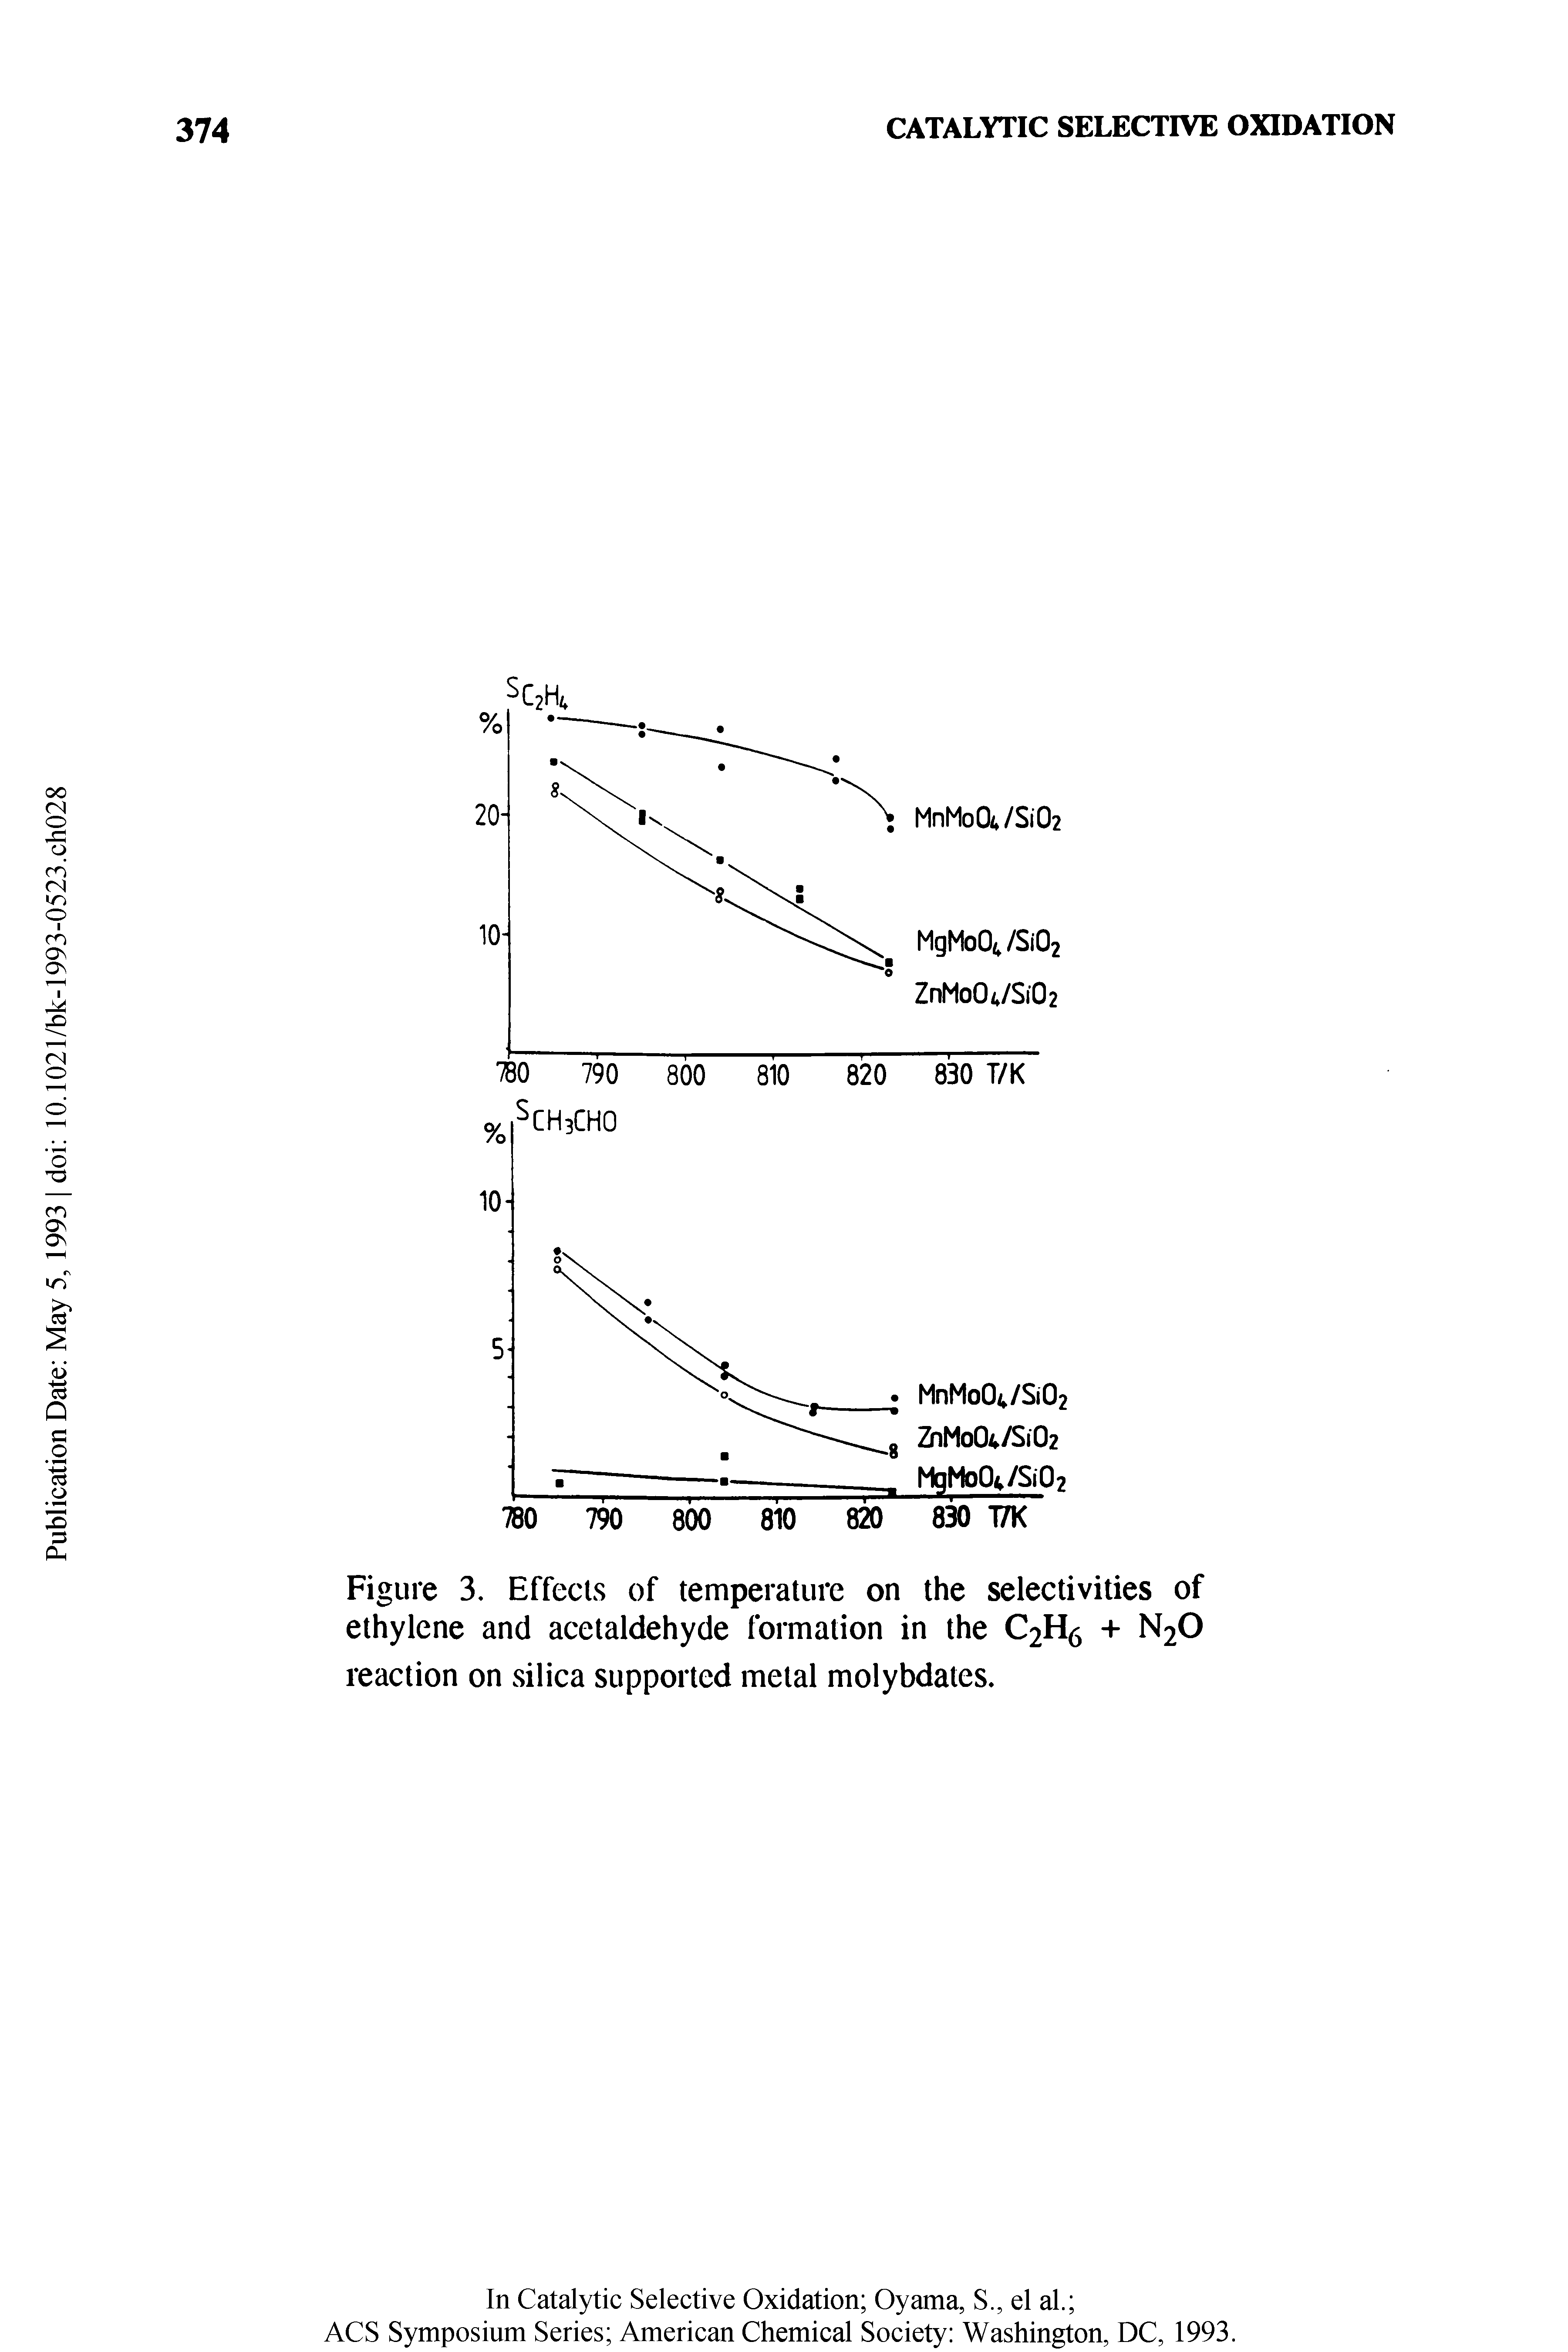 Figure 3. Effects of temperature on the selectivities of ethylene and acetaldehyde formation in the C2H6 + N2O reaction on silica supported metal molybdates.